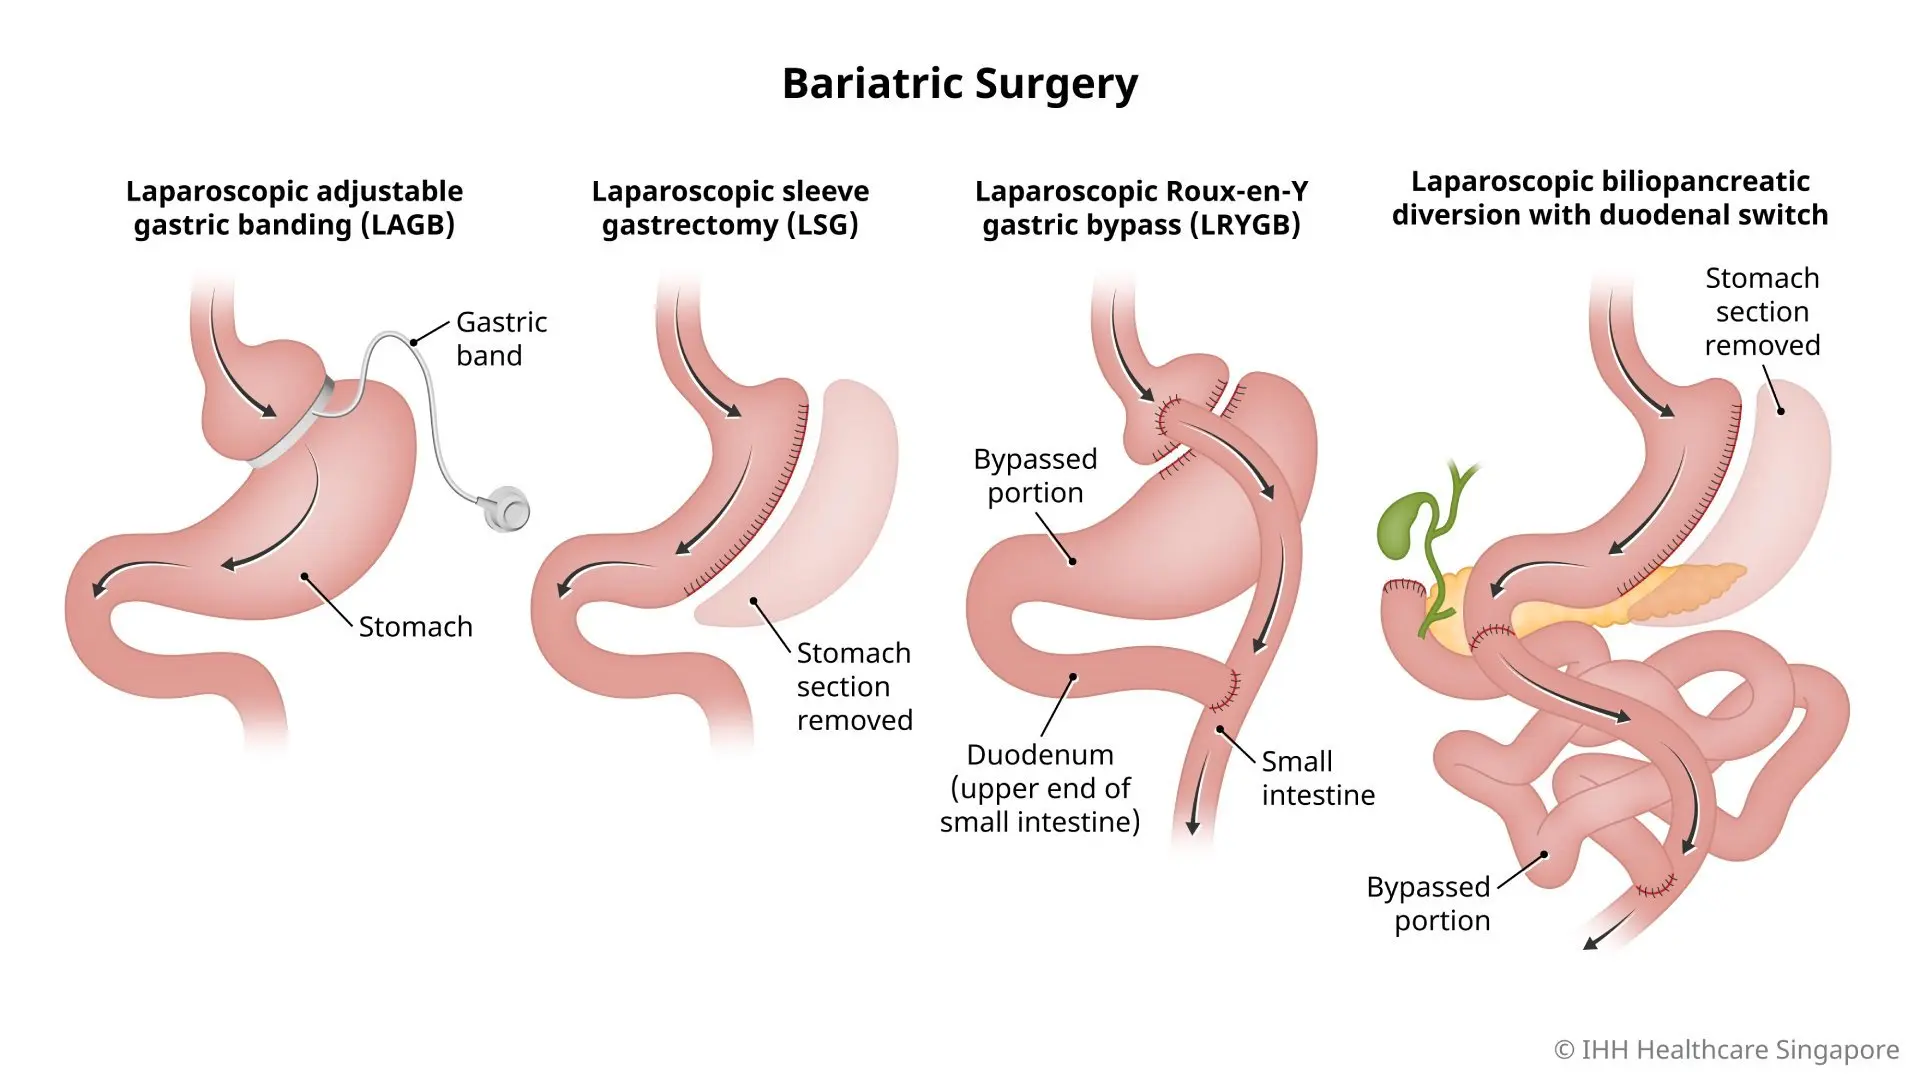 Illustration of bariatric surgery including LAGB, LSG, LRYGB, and laparoscopic biliopancreatic diversion with duodenal switch